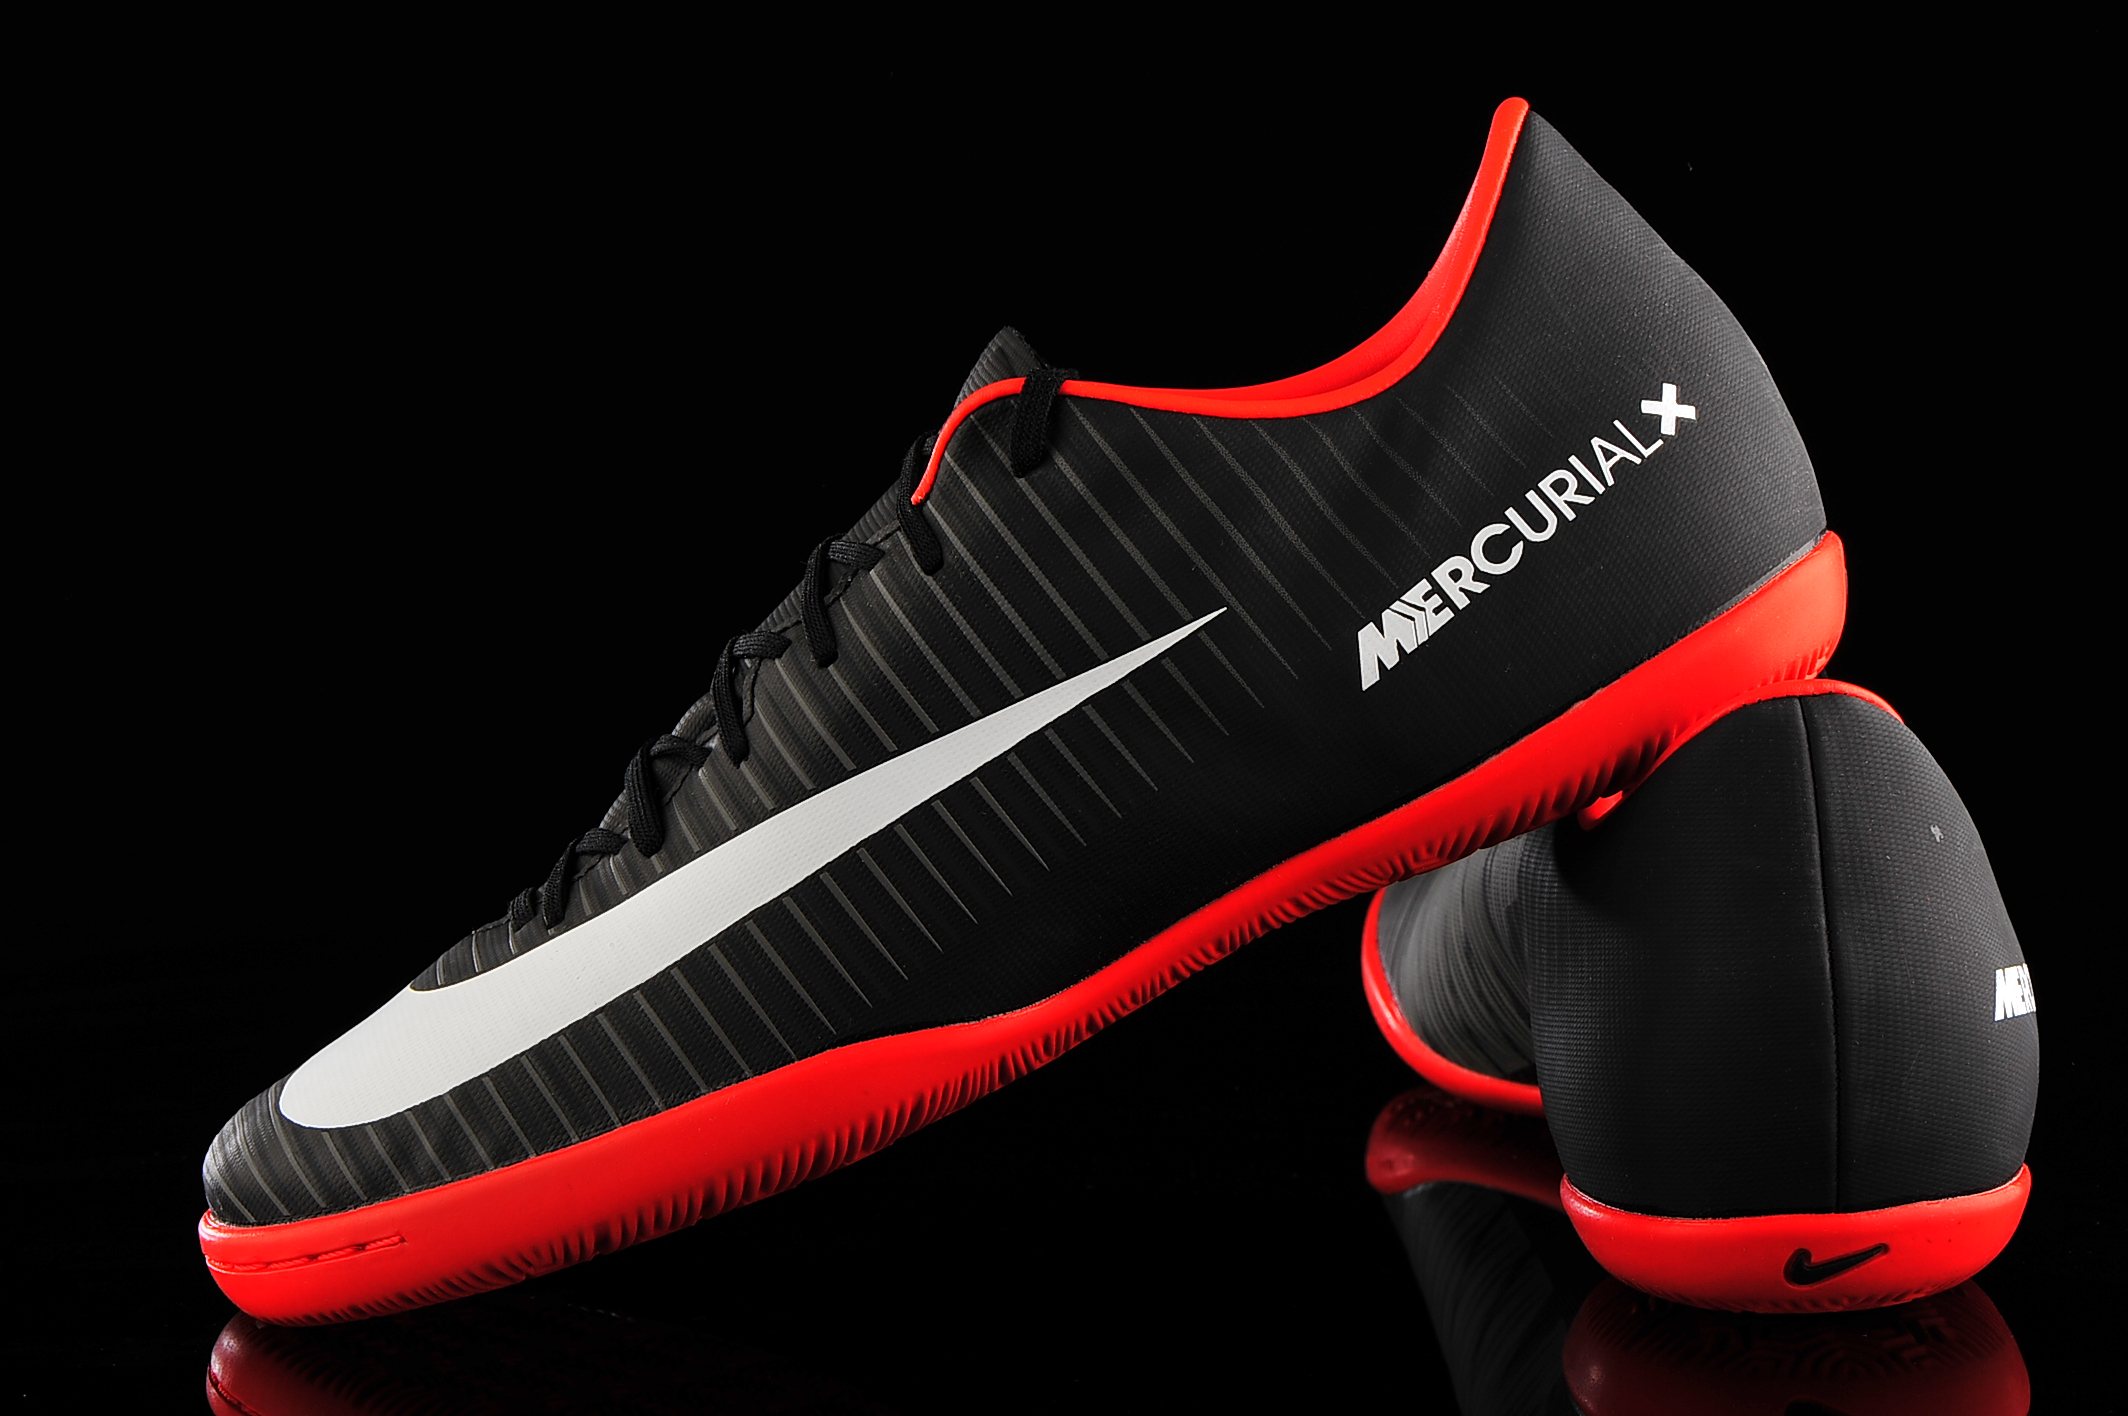 To take care paper why Nike MercurialX Victory VI IC 831966-002 | R-GOL.com - Football boots &  equipment